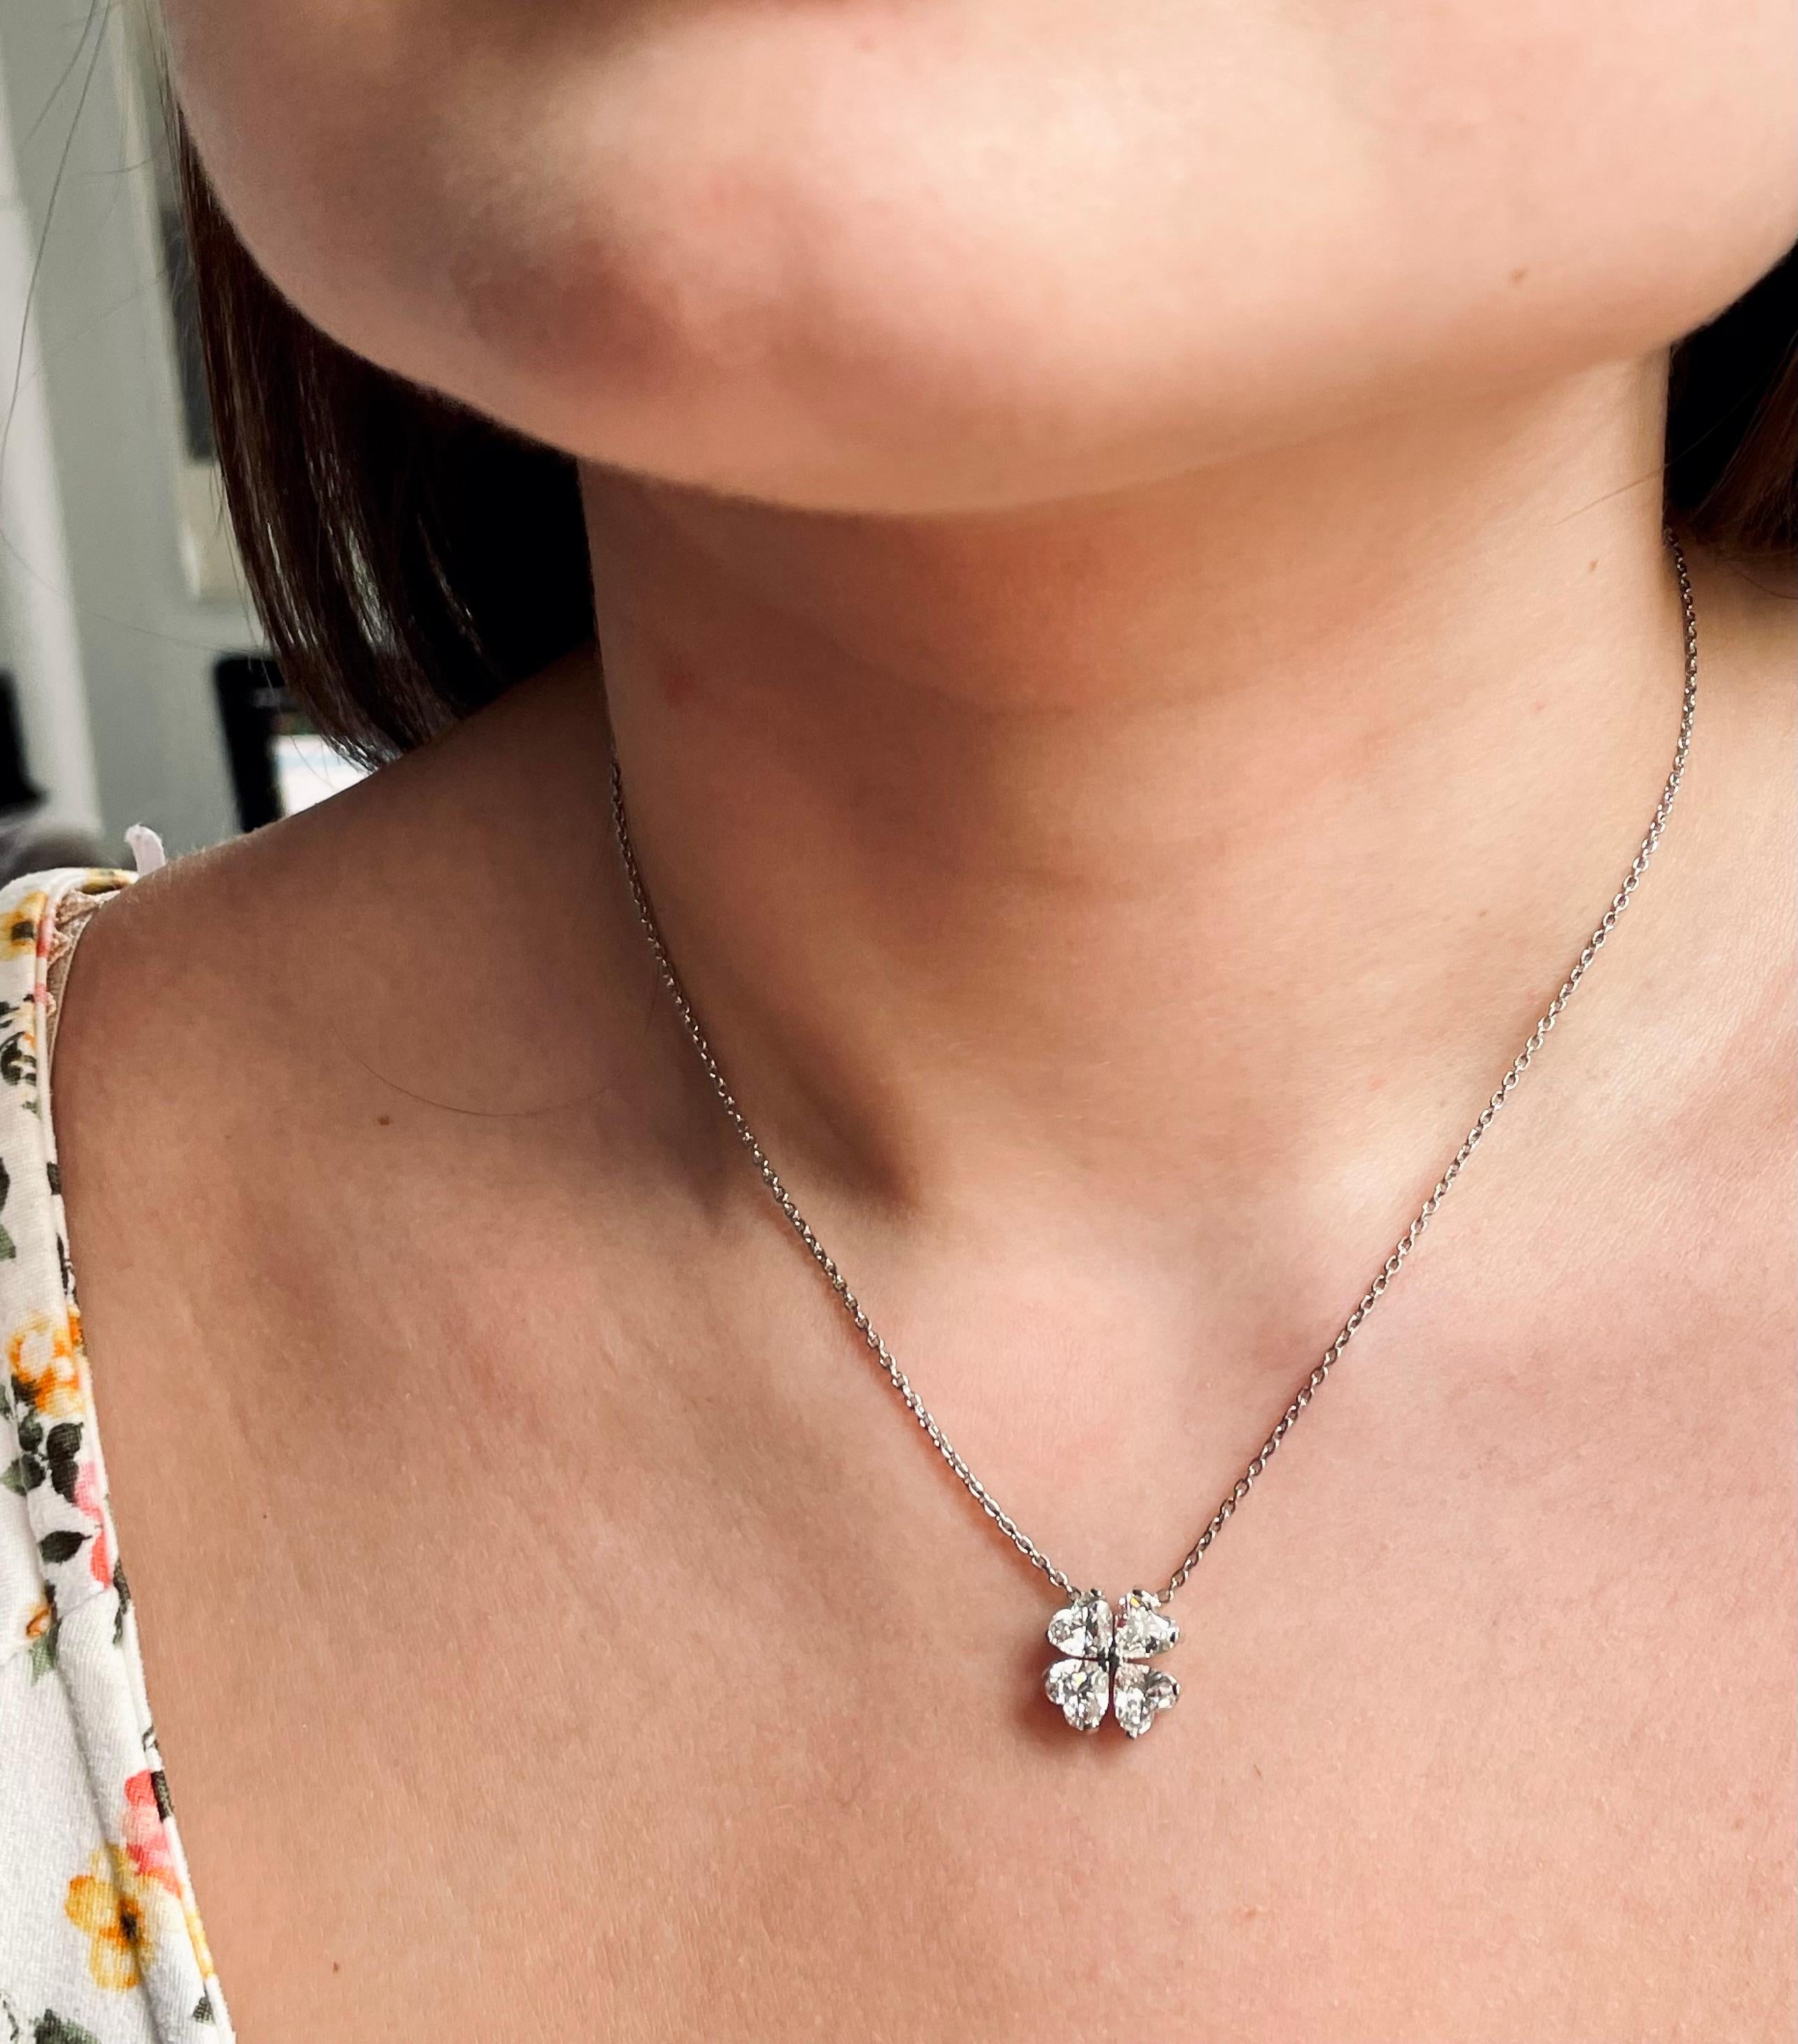 This gorgeous statement pendant by J. Birnbach is a special piece that you will enjoy wearing day to day or for a more formal occasion. Delicate enough to be worn casually, but impactful enough for something special, this unique take on a diamond